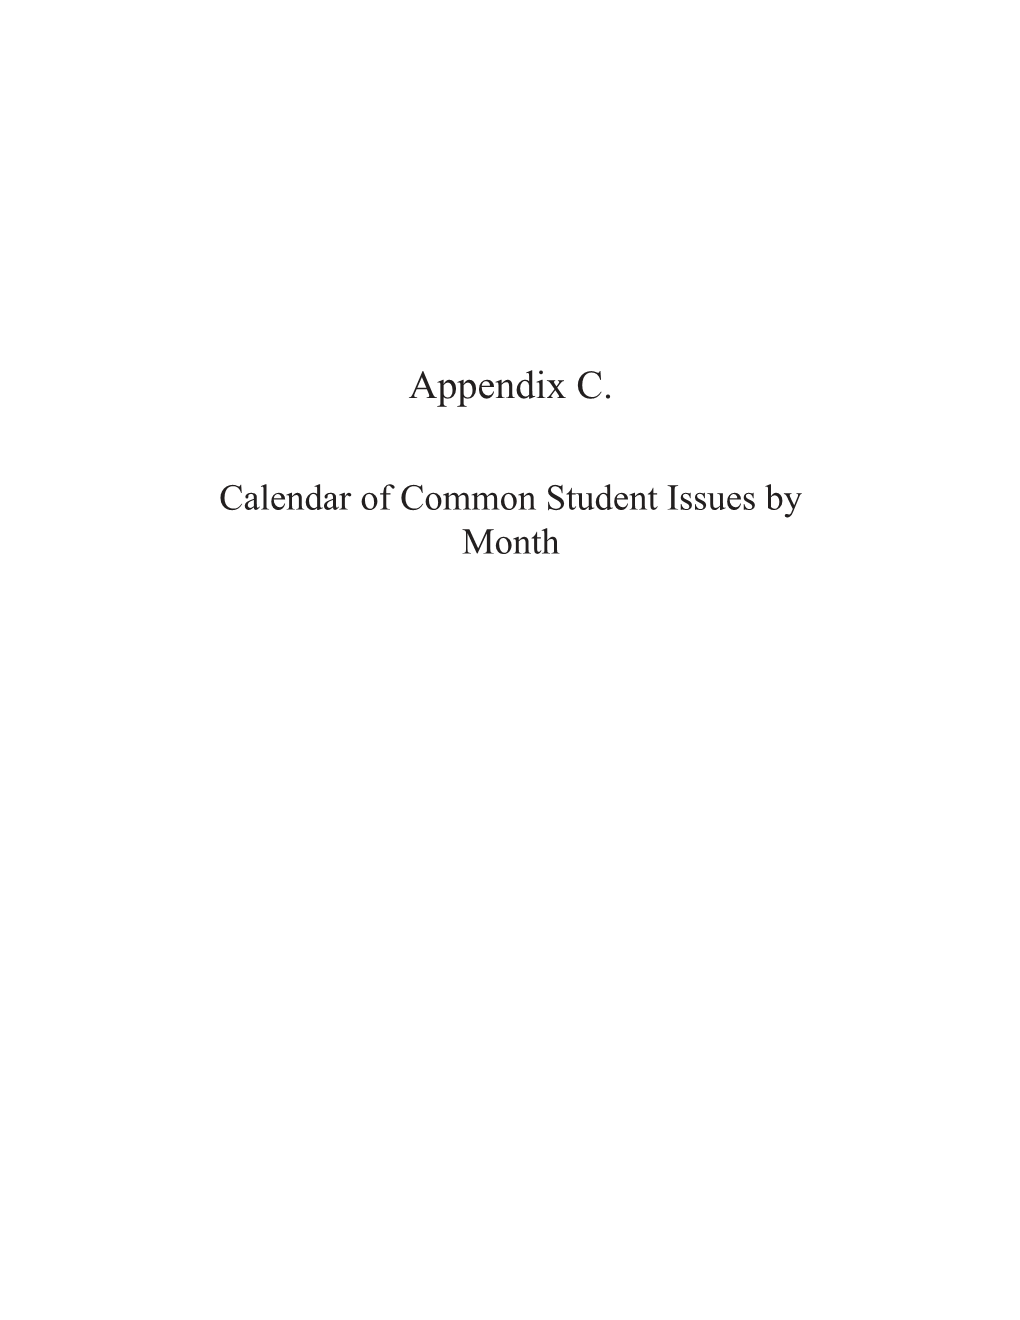 Calendar of Common Student Issues By